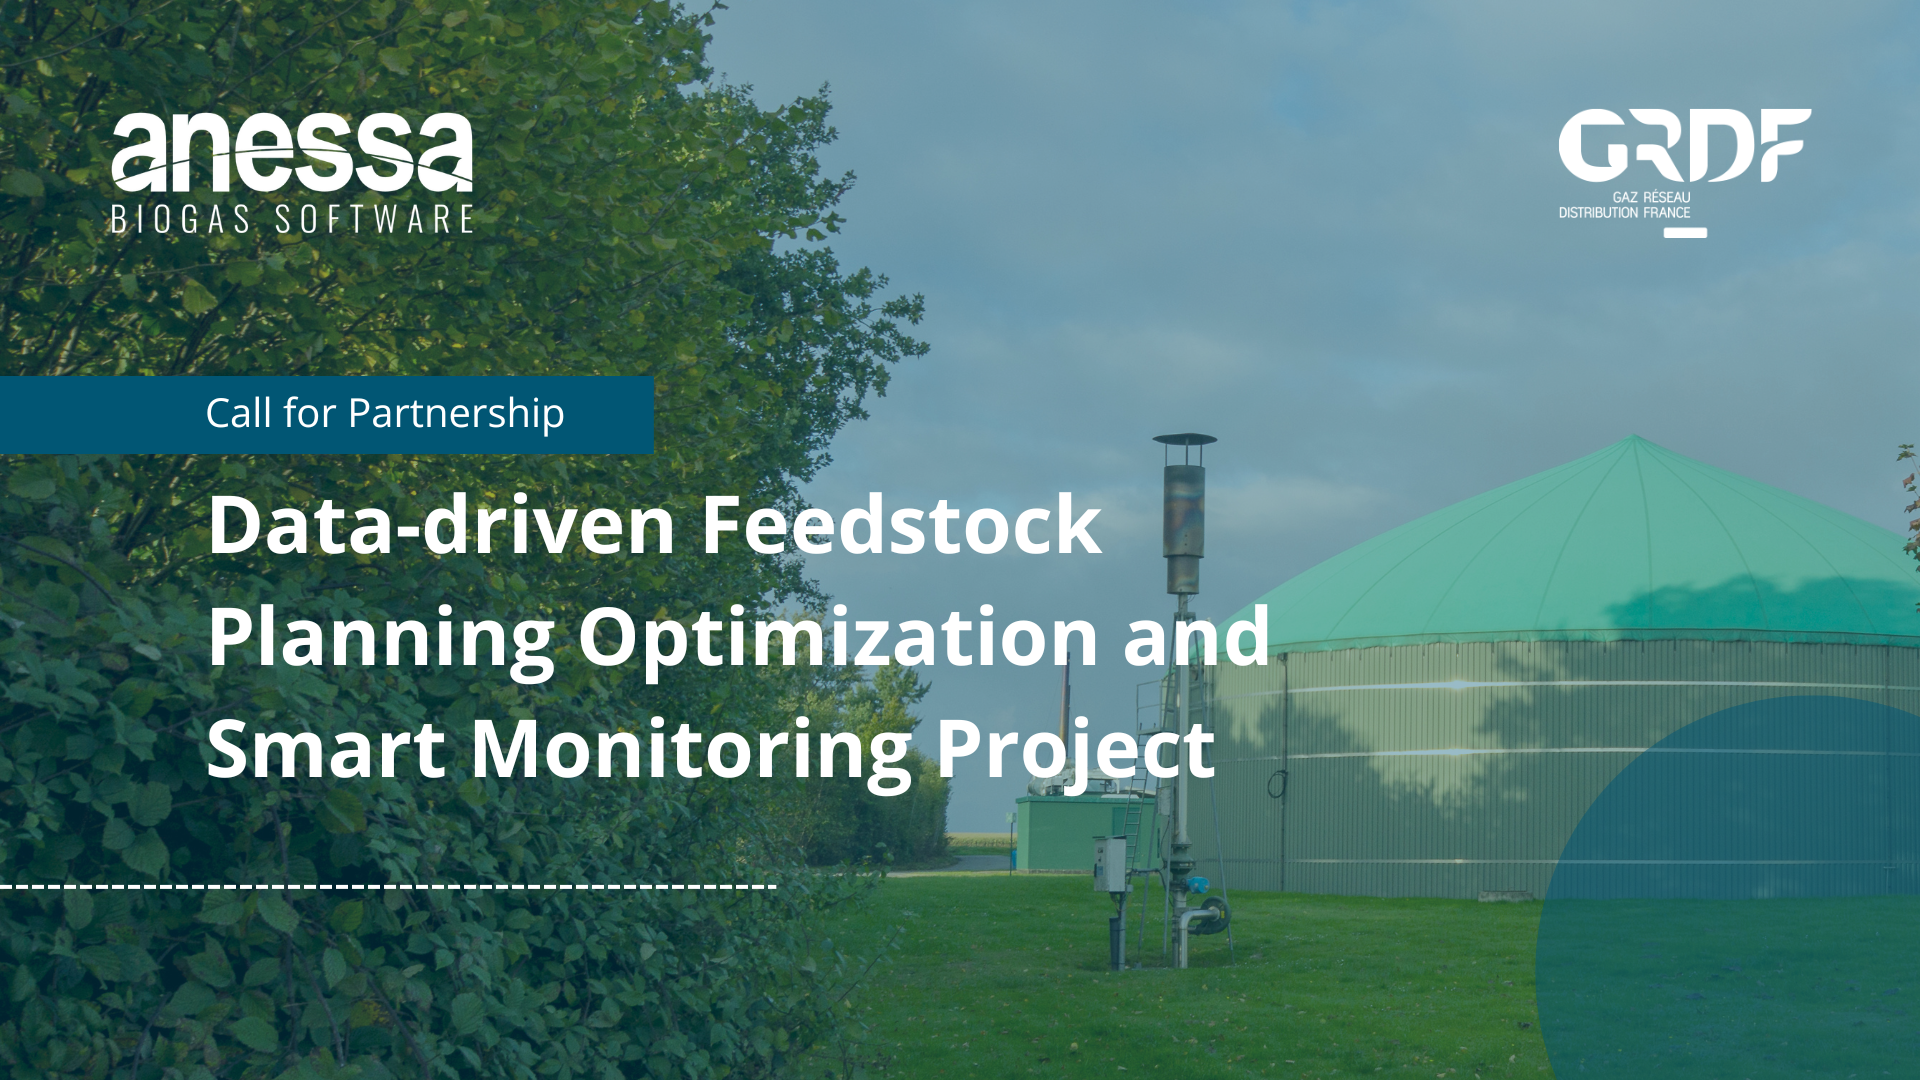 Call For Partnerhsip: Data-driven Feedstock Planning Optimization and Smart Monitoring Project. Anessa & GRDF Project